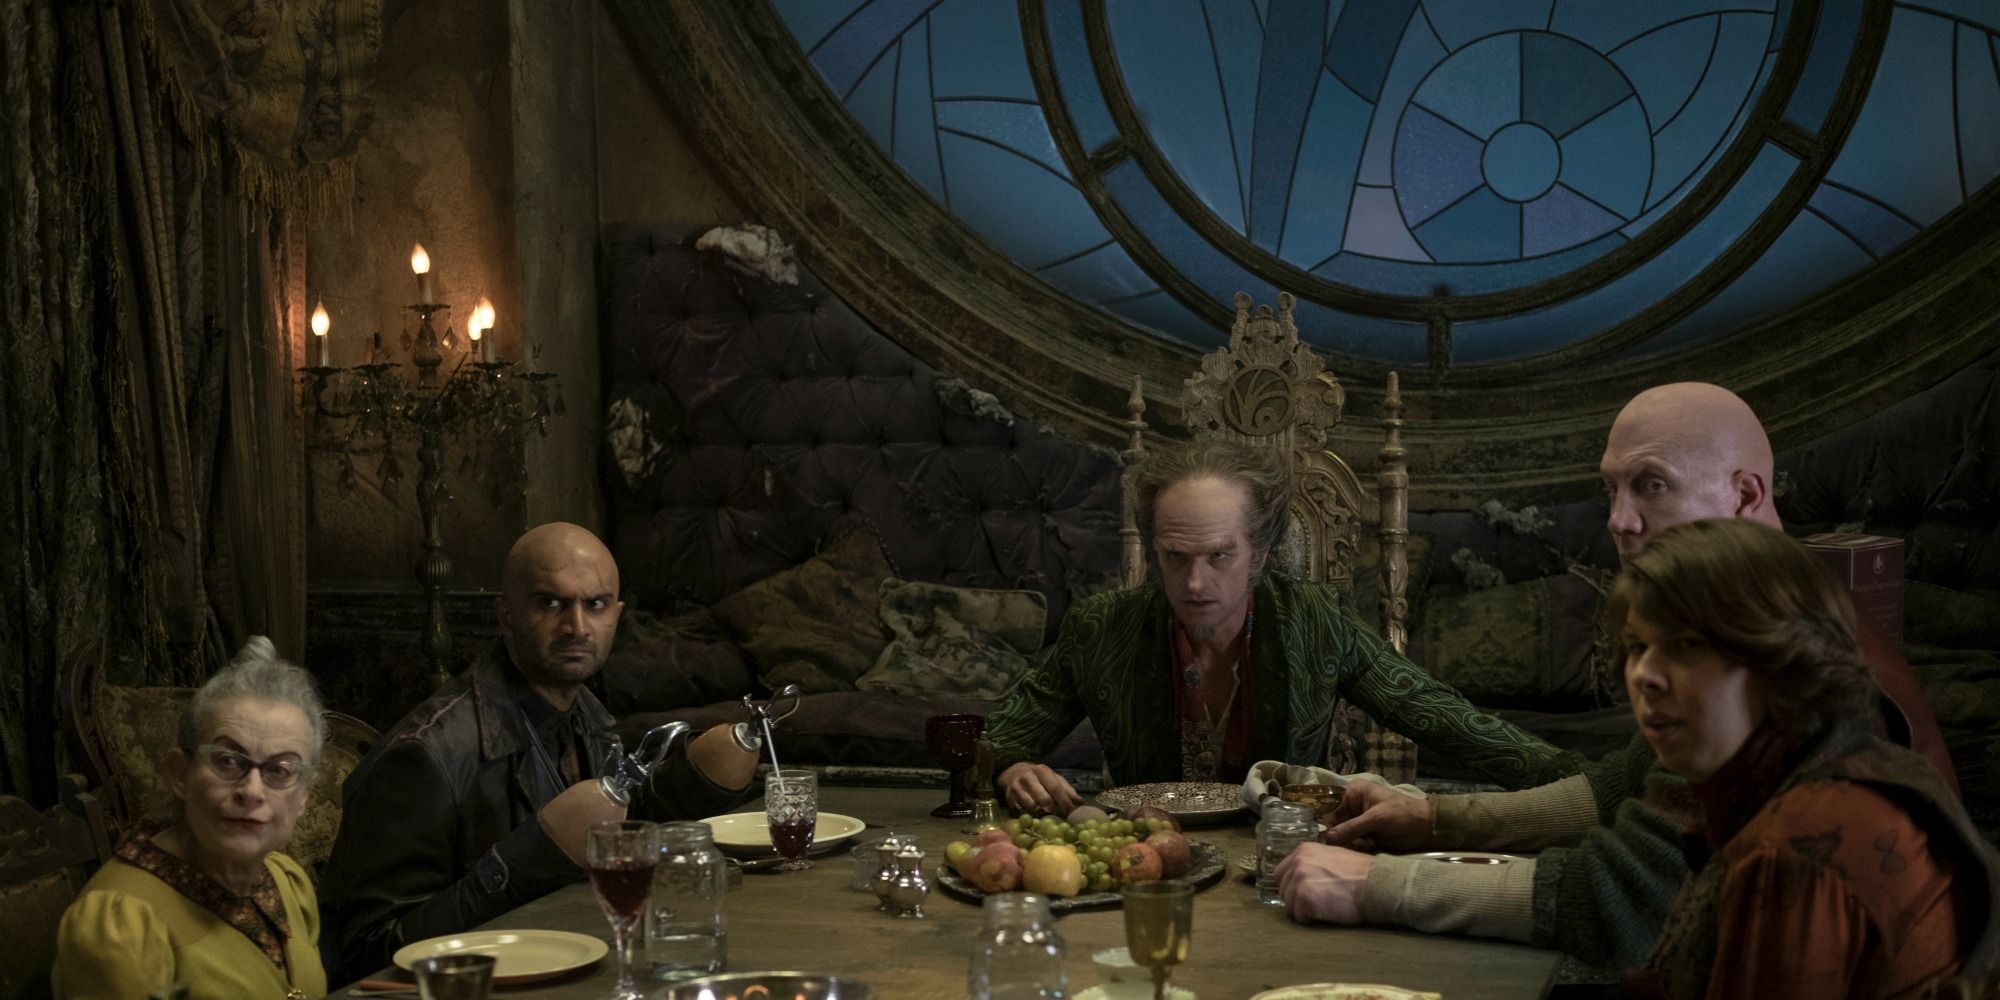 A Series Of Unfortunate Events Count Olaf and friends